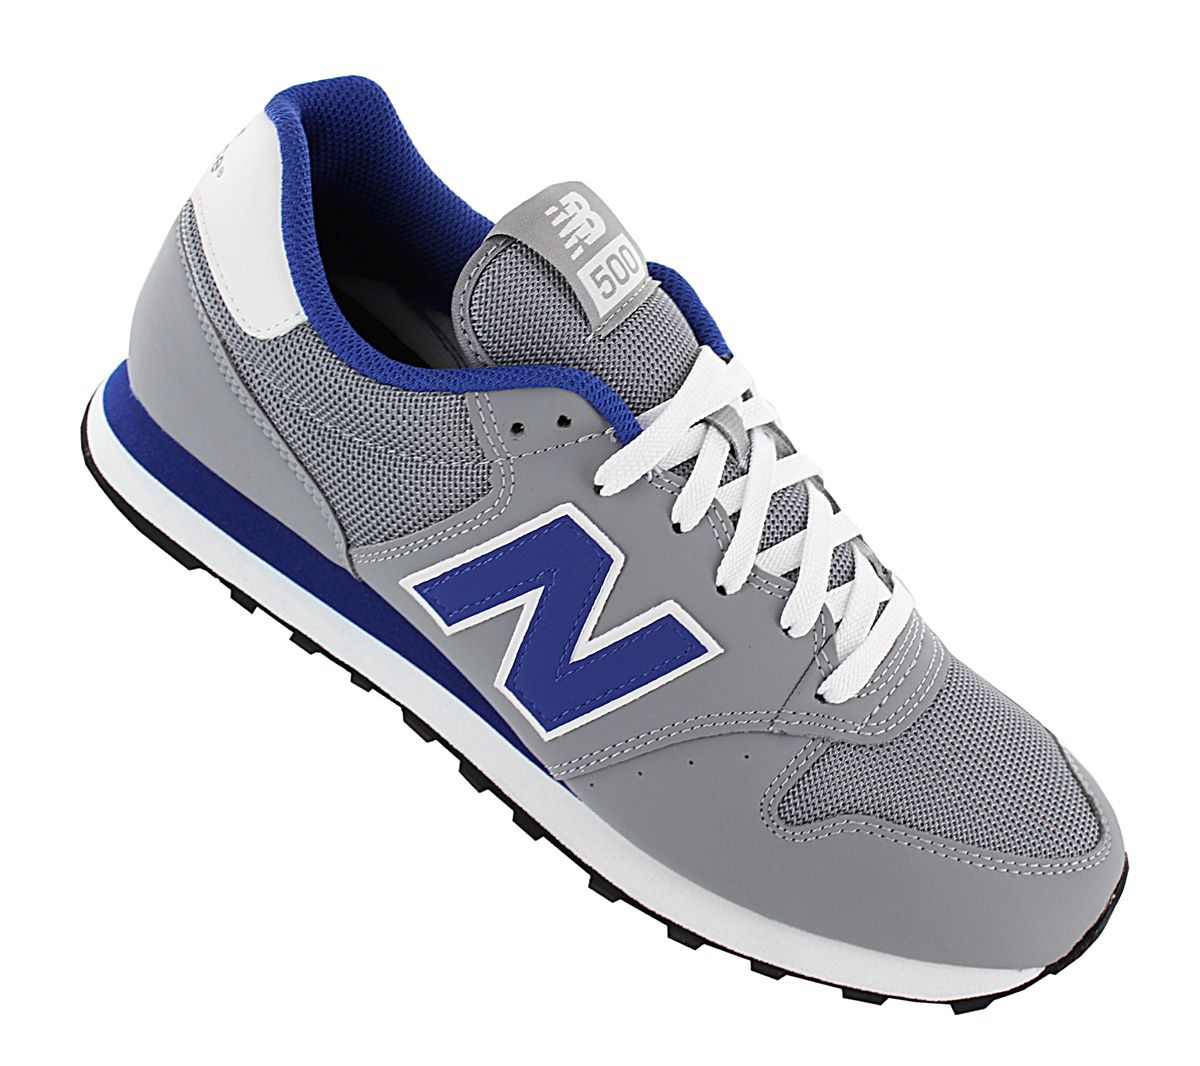 New Balance Lifestyle GM500 GM500TRS Men's Sneaker Leisure Sports Shoes